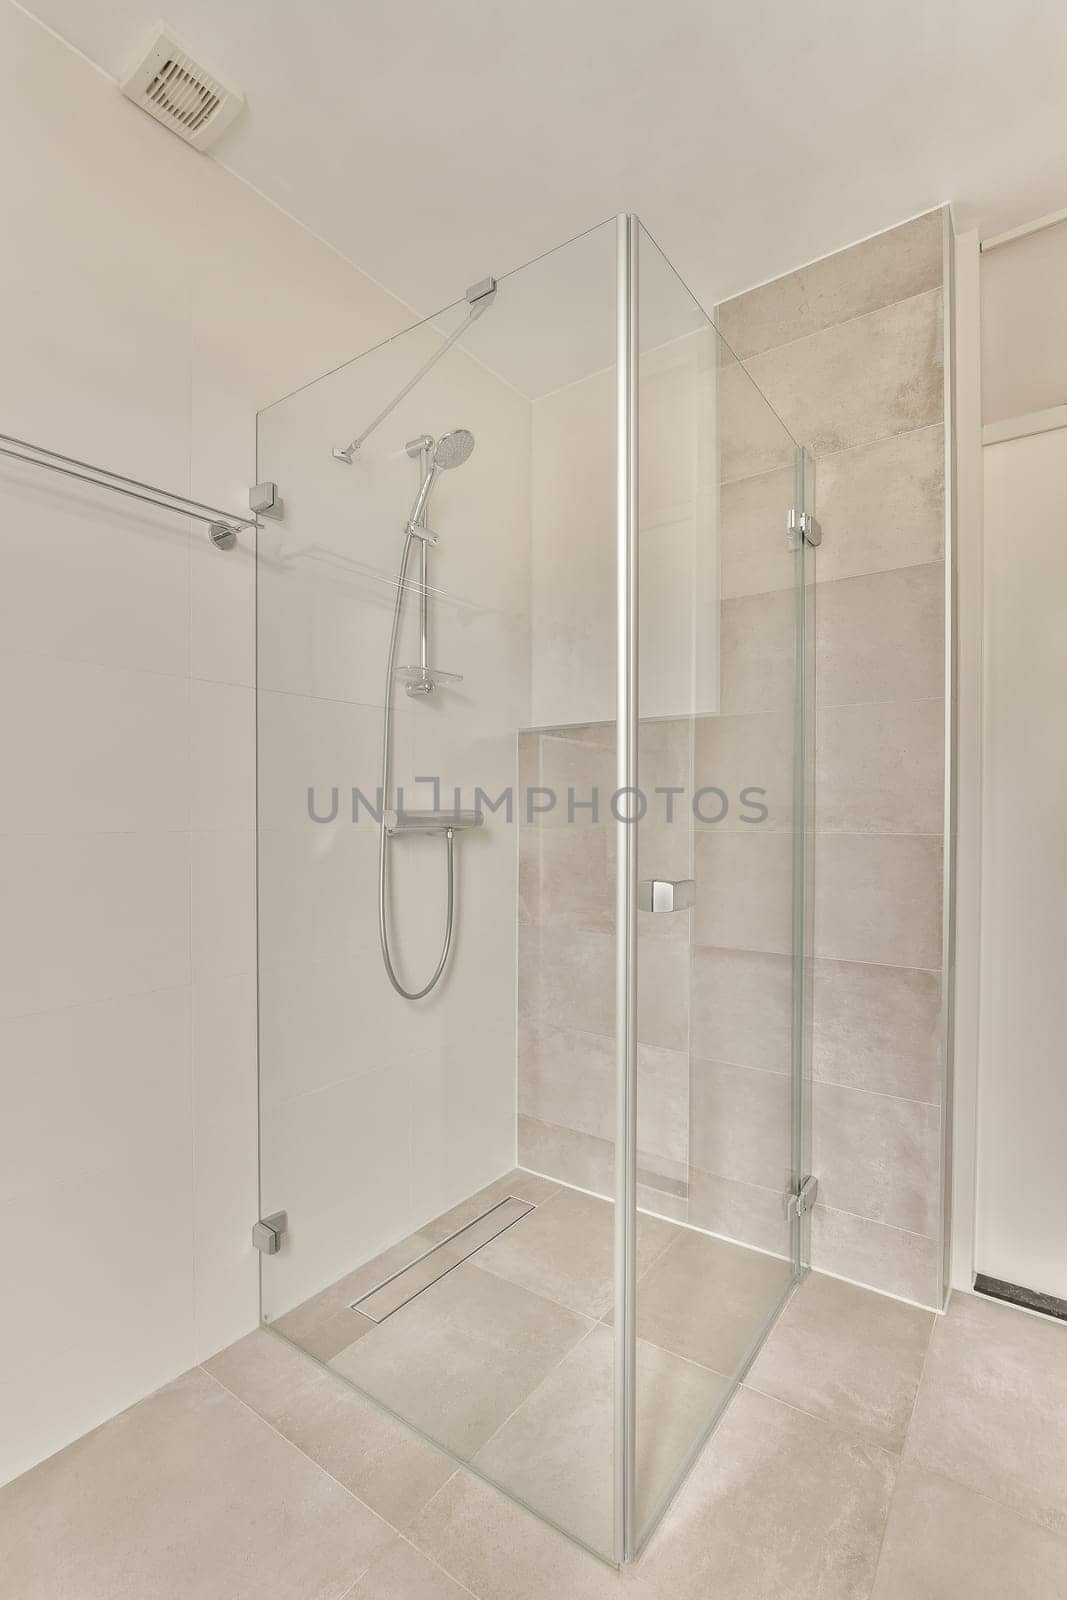 a bathroom with a glass shower door and white tiles on the floor, along with a walk - in shower stall